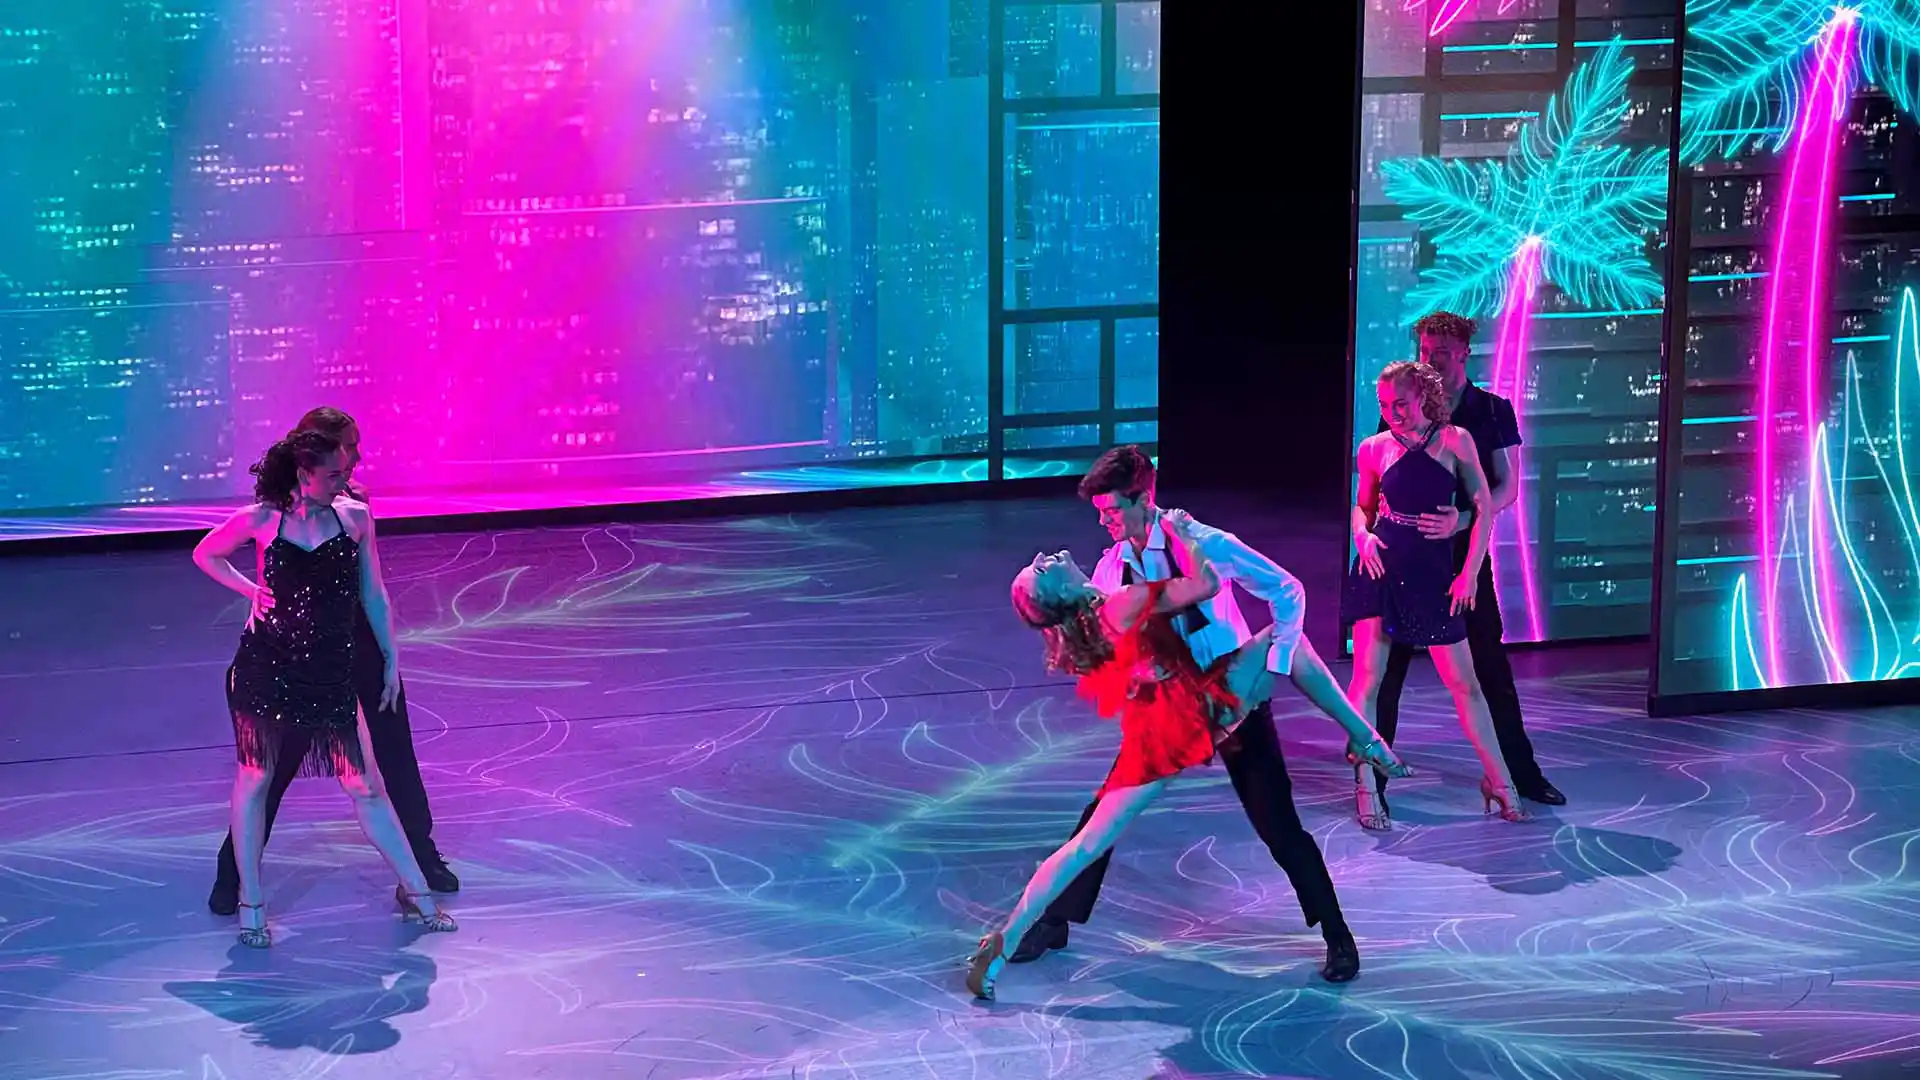 Six dancers perform on stage with teal and pink lighting above and behind them.